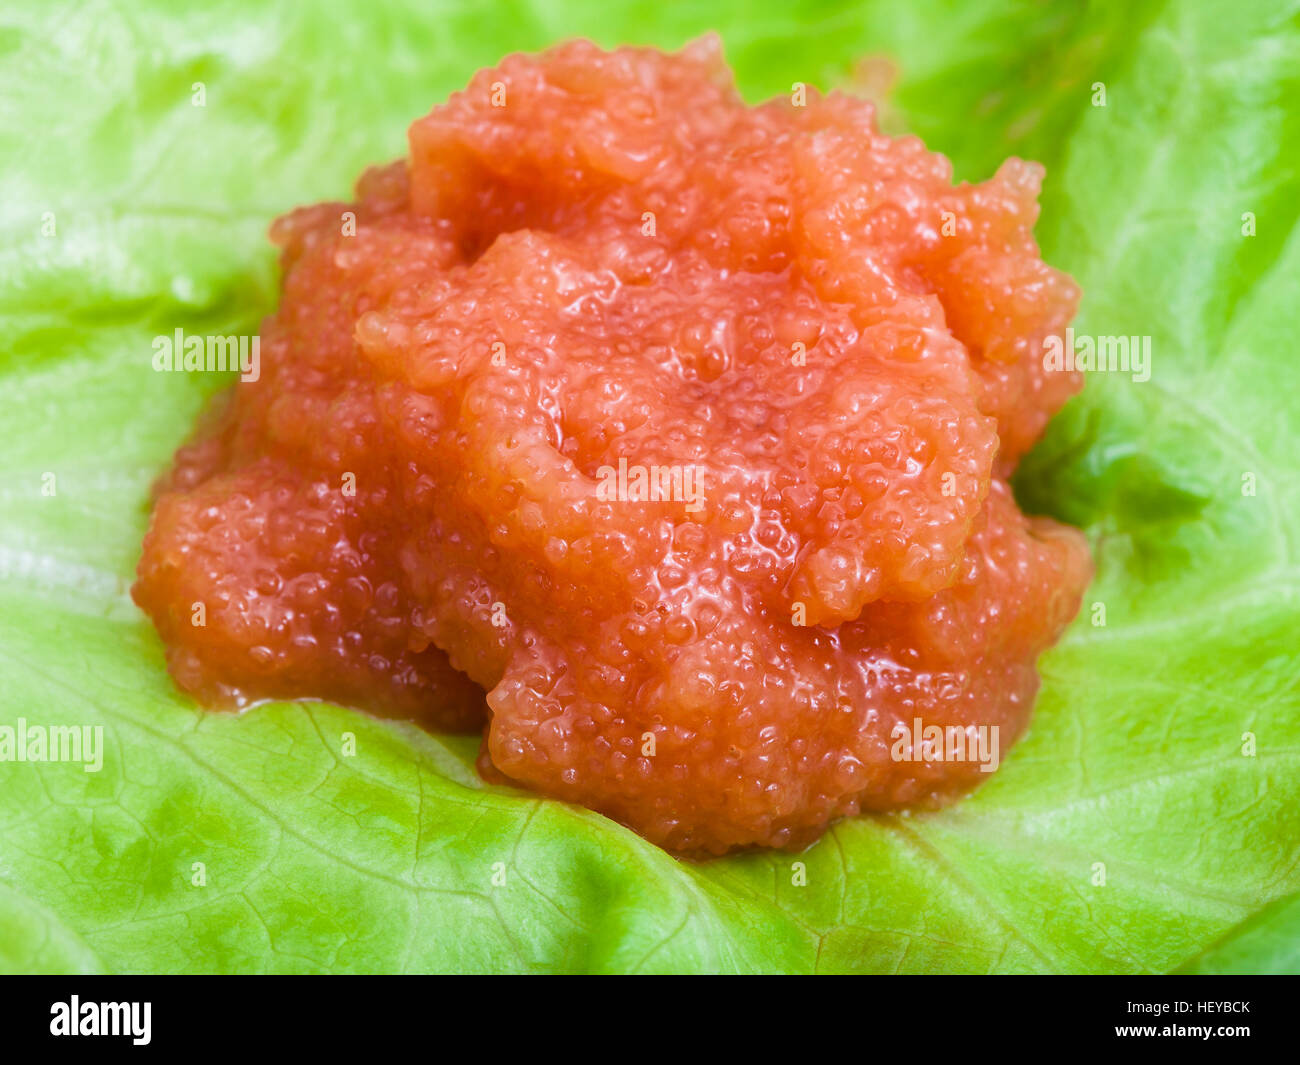 portion of salty caviar of coregonus whitefish on green leaf Stock Photo